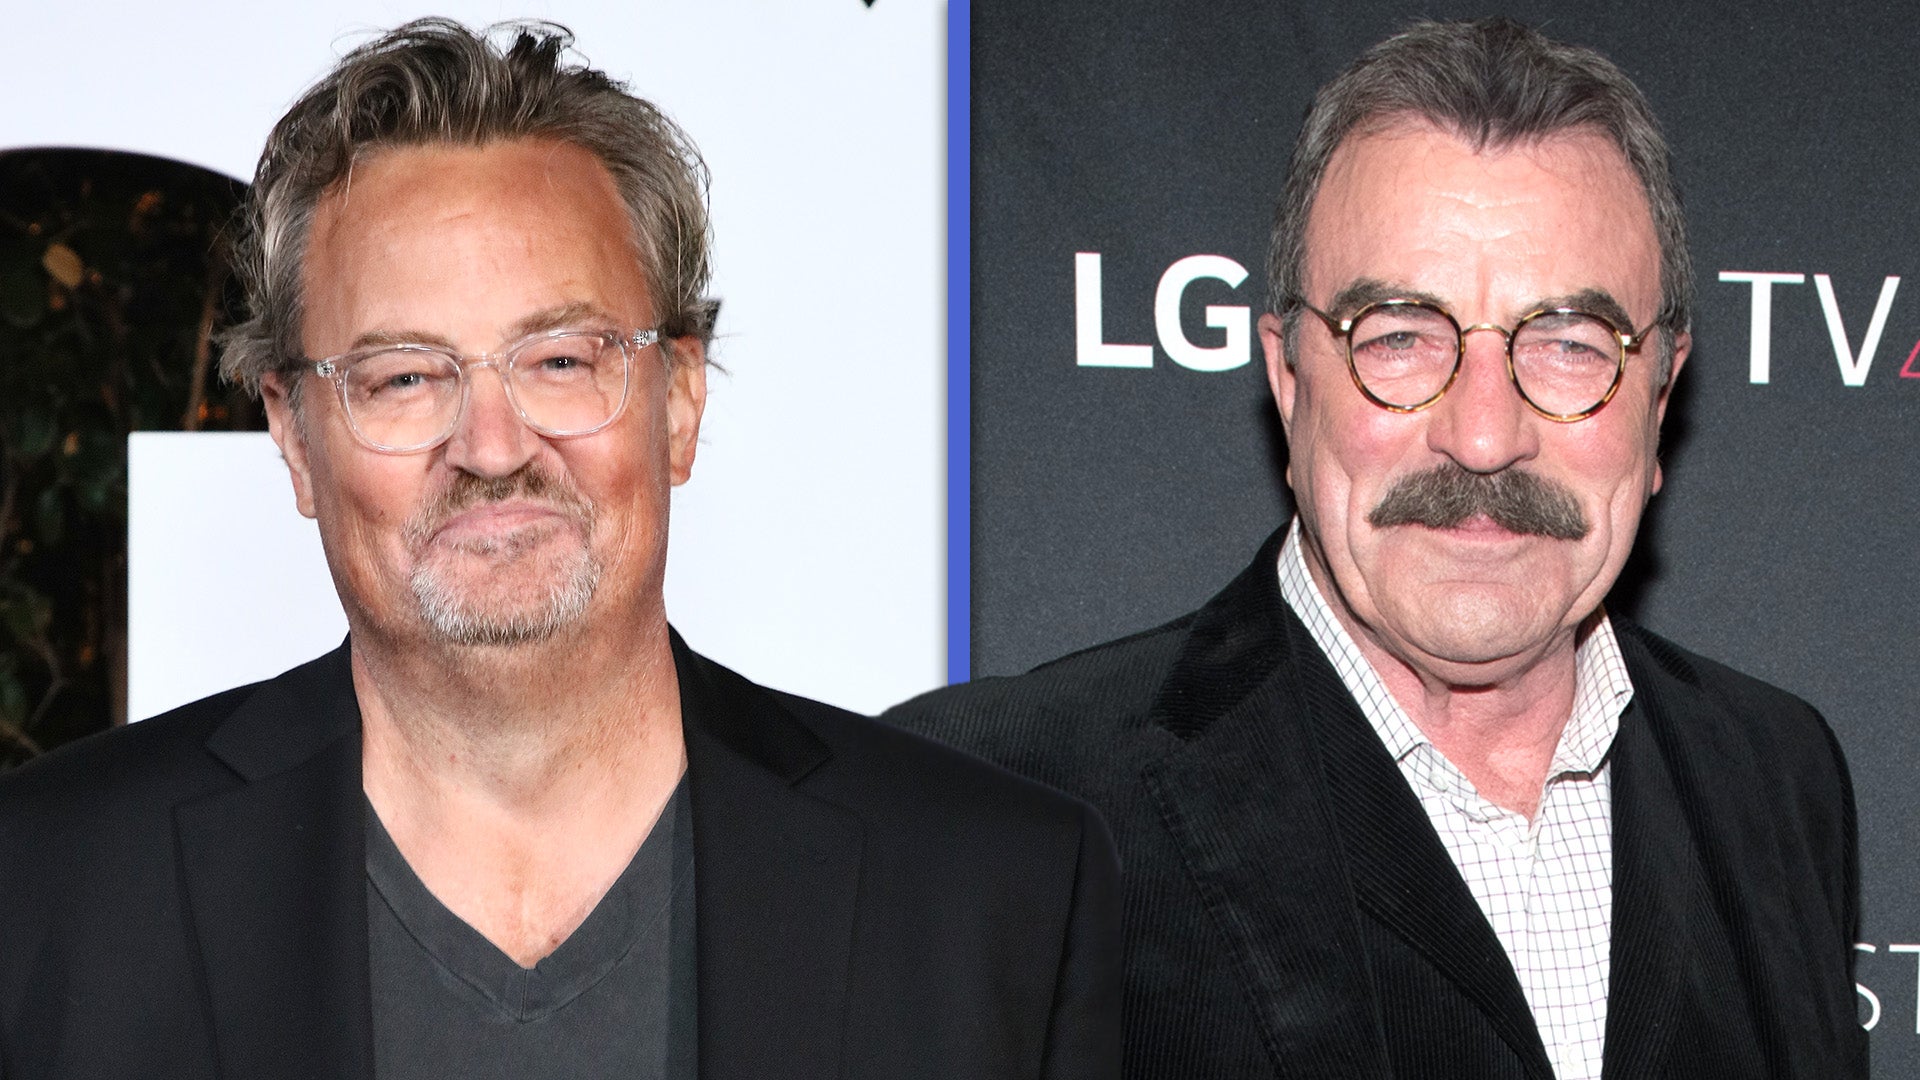 Tom Selleck Recalls Private Moments With Matthew Perry While on Set of 'Friends'